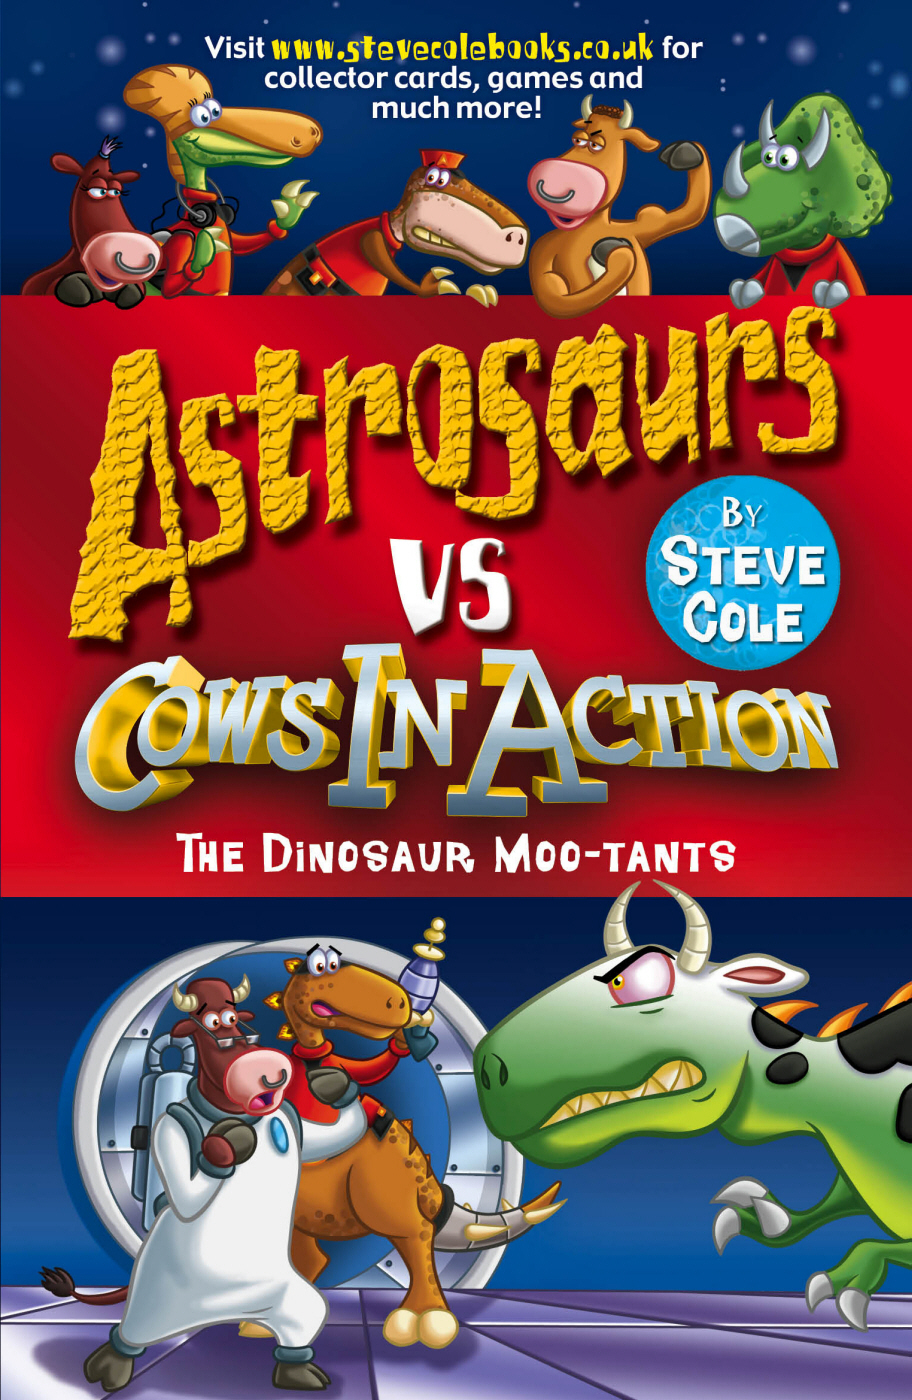 The Dinosaur Moo-Tants (Astrosaurs Vs Cows In Action)